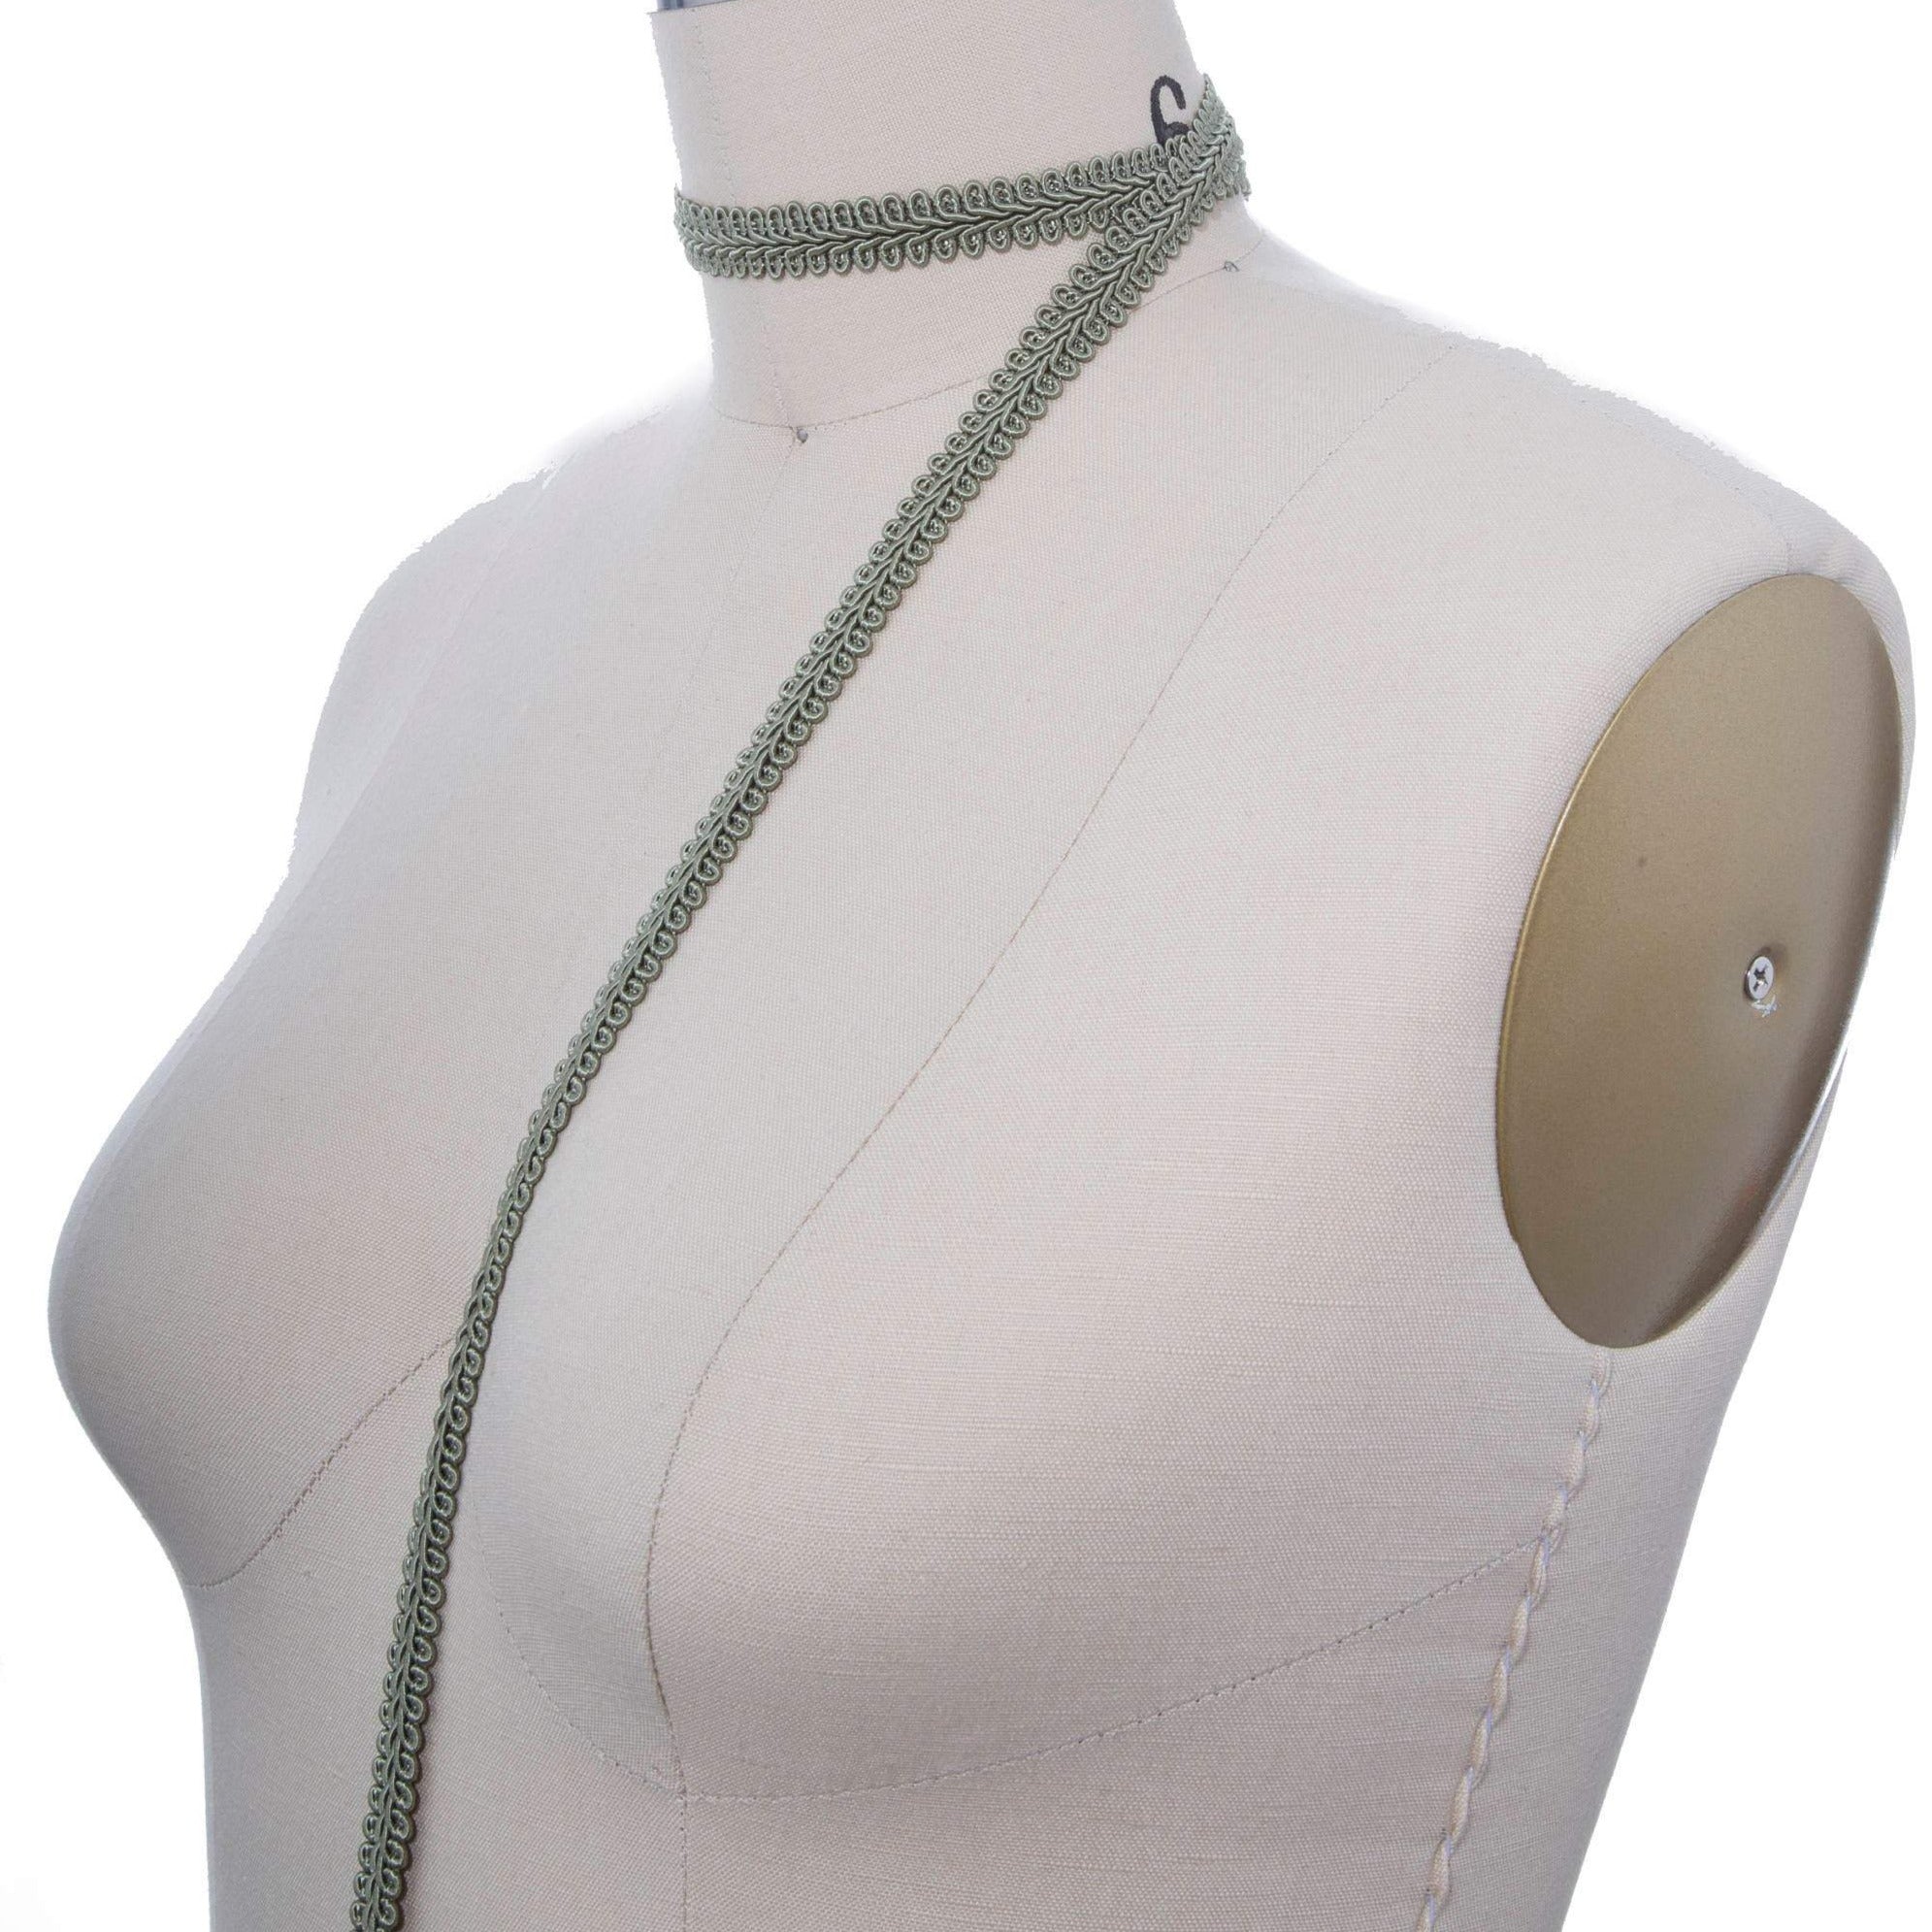 5/8" Moss Green Braided Upholstery French Gimp